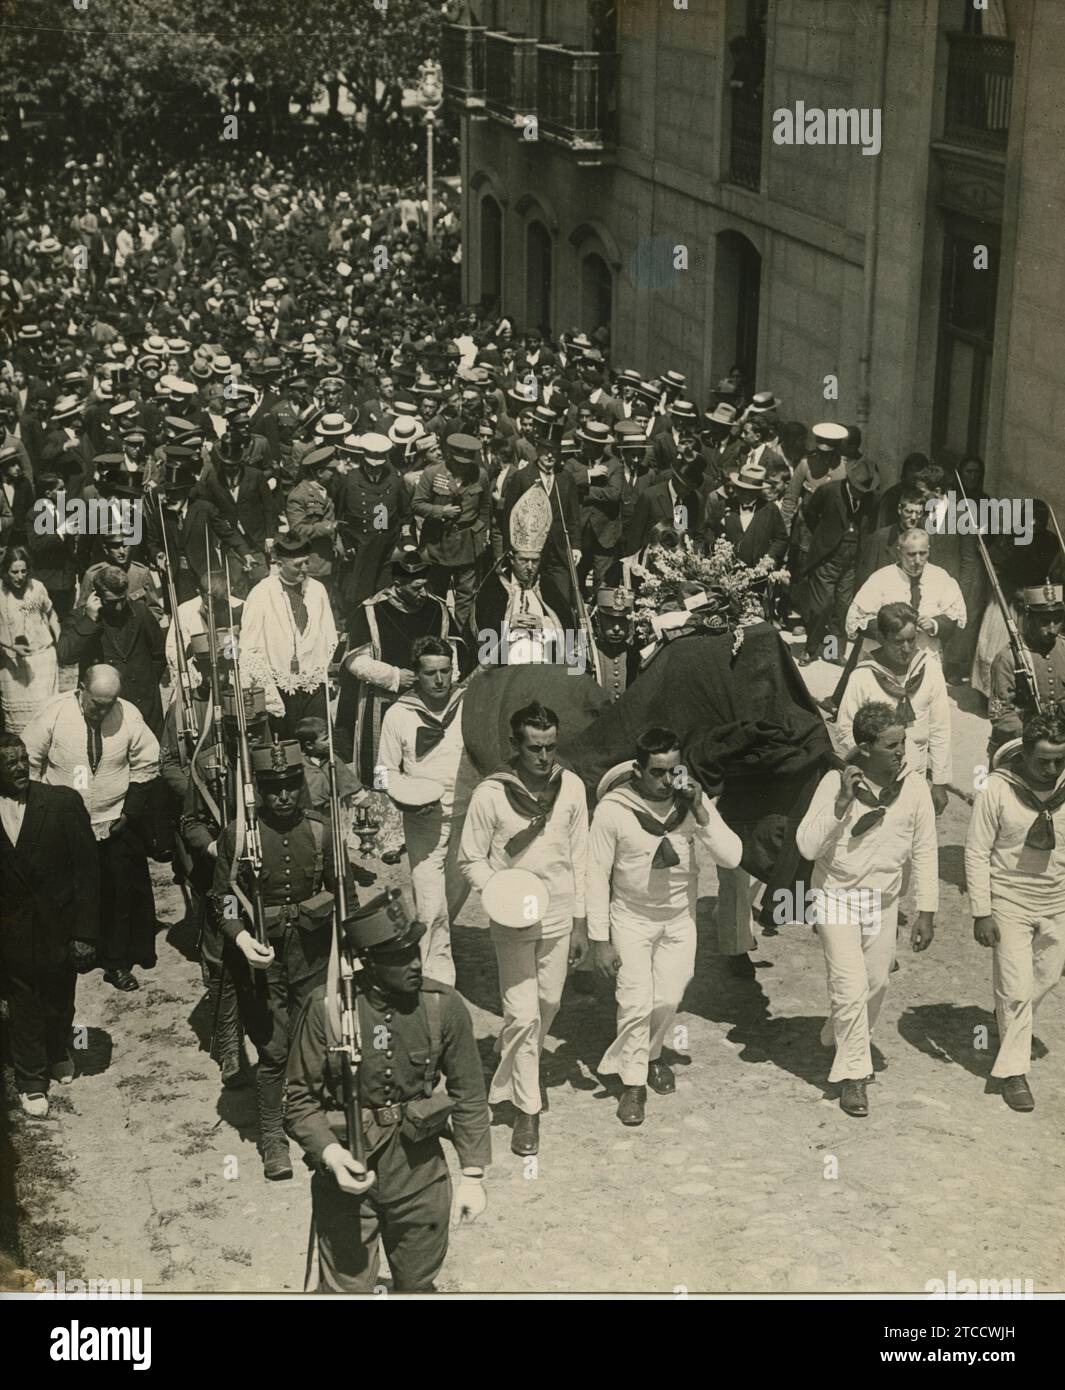 Avilés, August 1924. Procession of the transfer of the remains of the colonizer Pedro Menéndez, heading to the church of San Nicolás, where they were deposited. Credit: Album / Archivo ABC / Pío Stock Photo